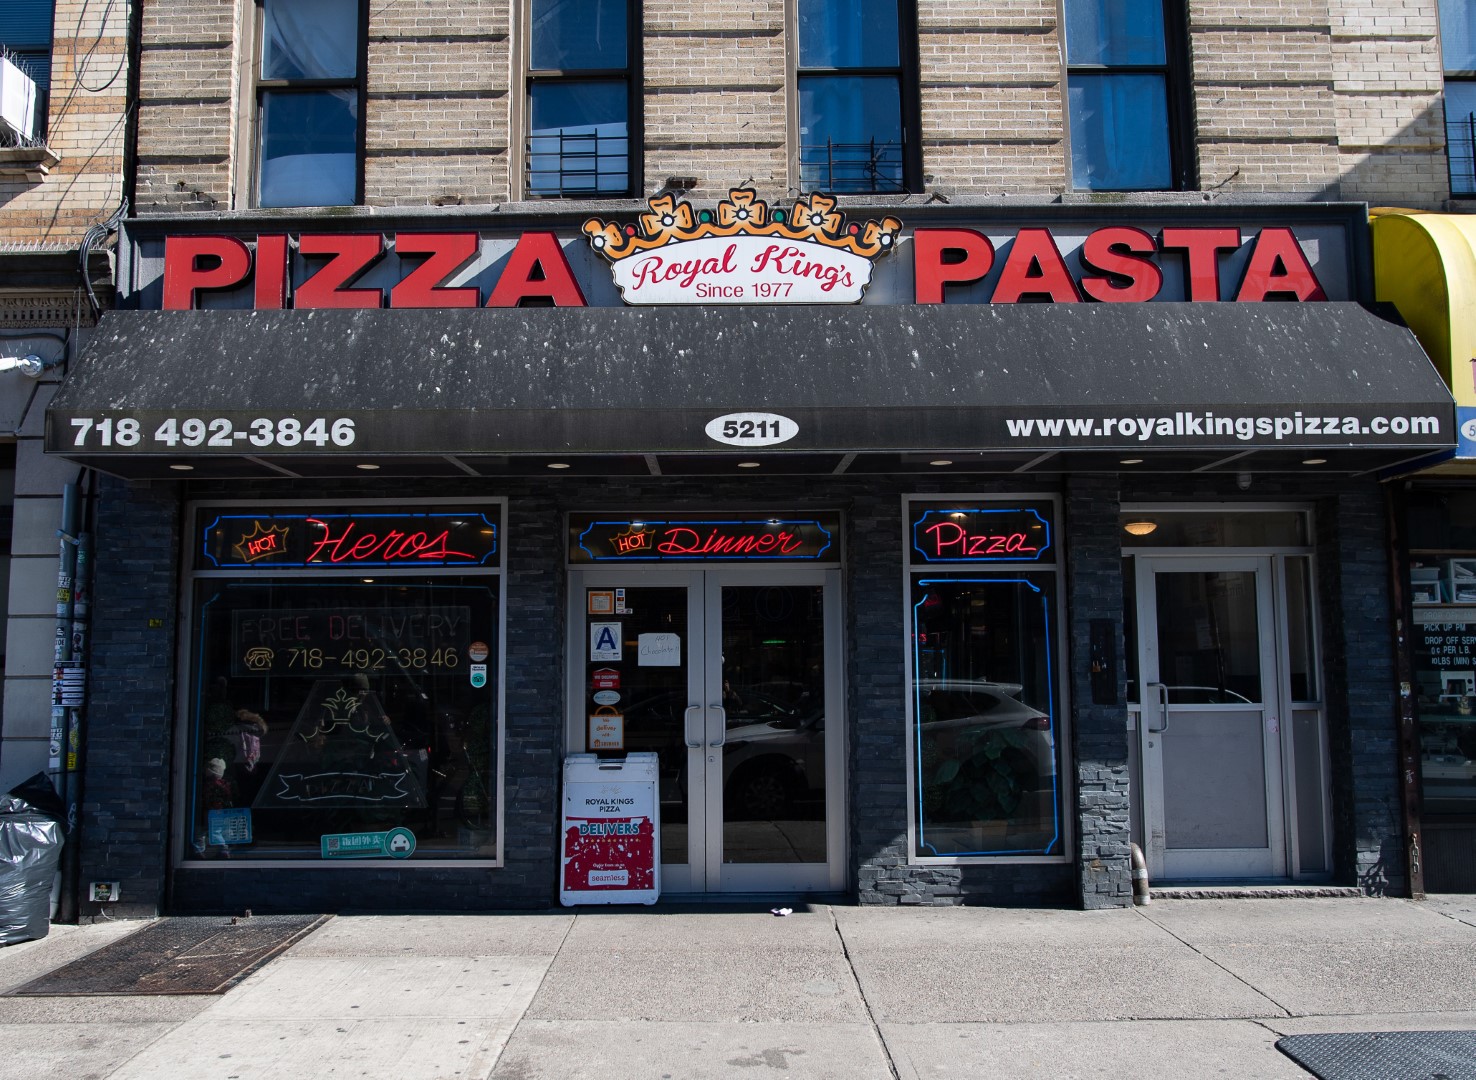 A street view of royal kings pizza pasta restaurant with signs displaying the business name, food options, phone number, and website link on a sunny day.